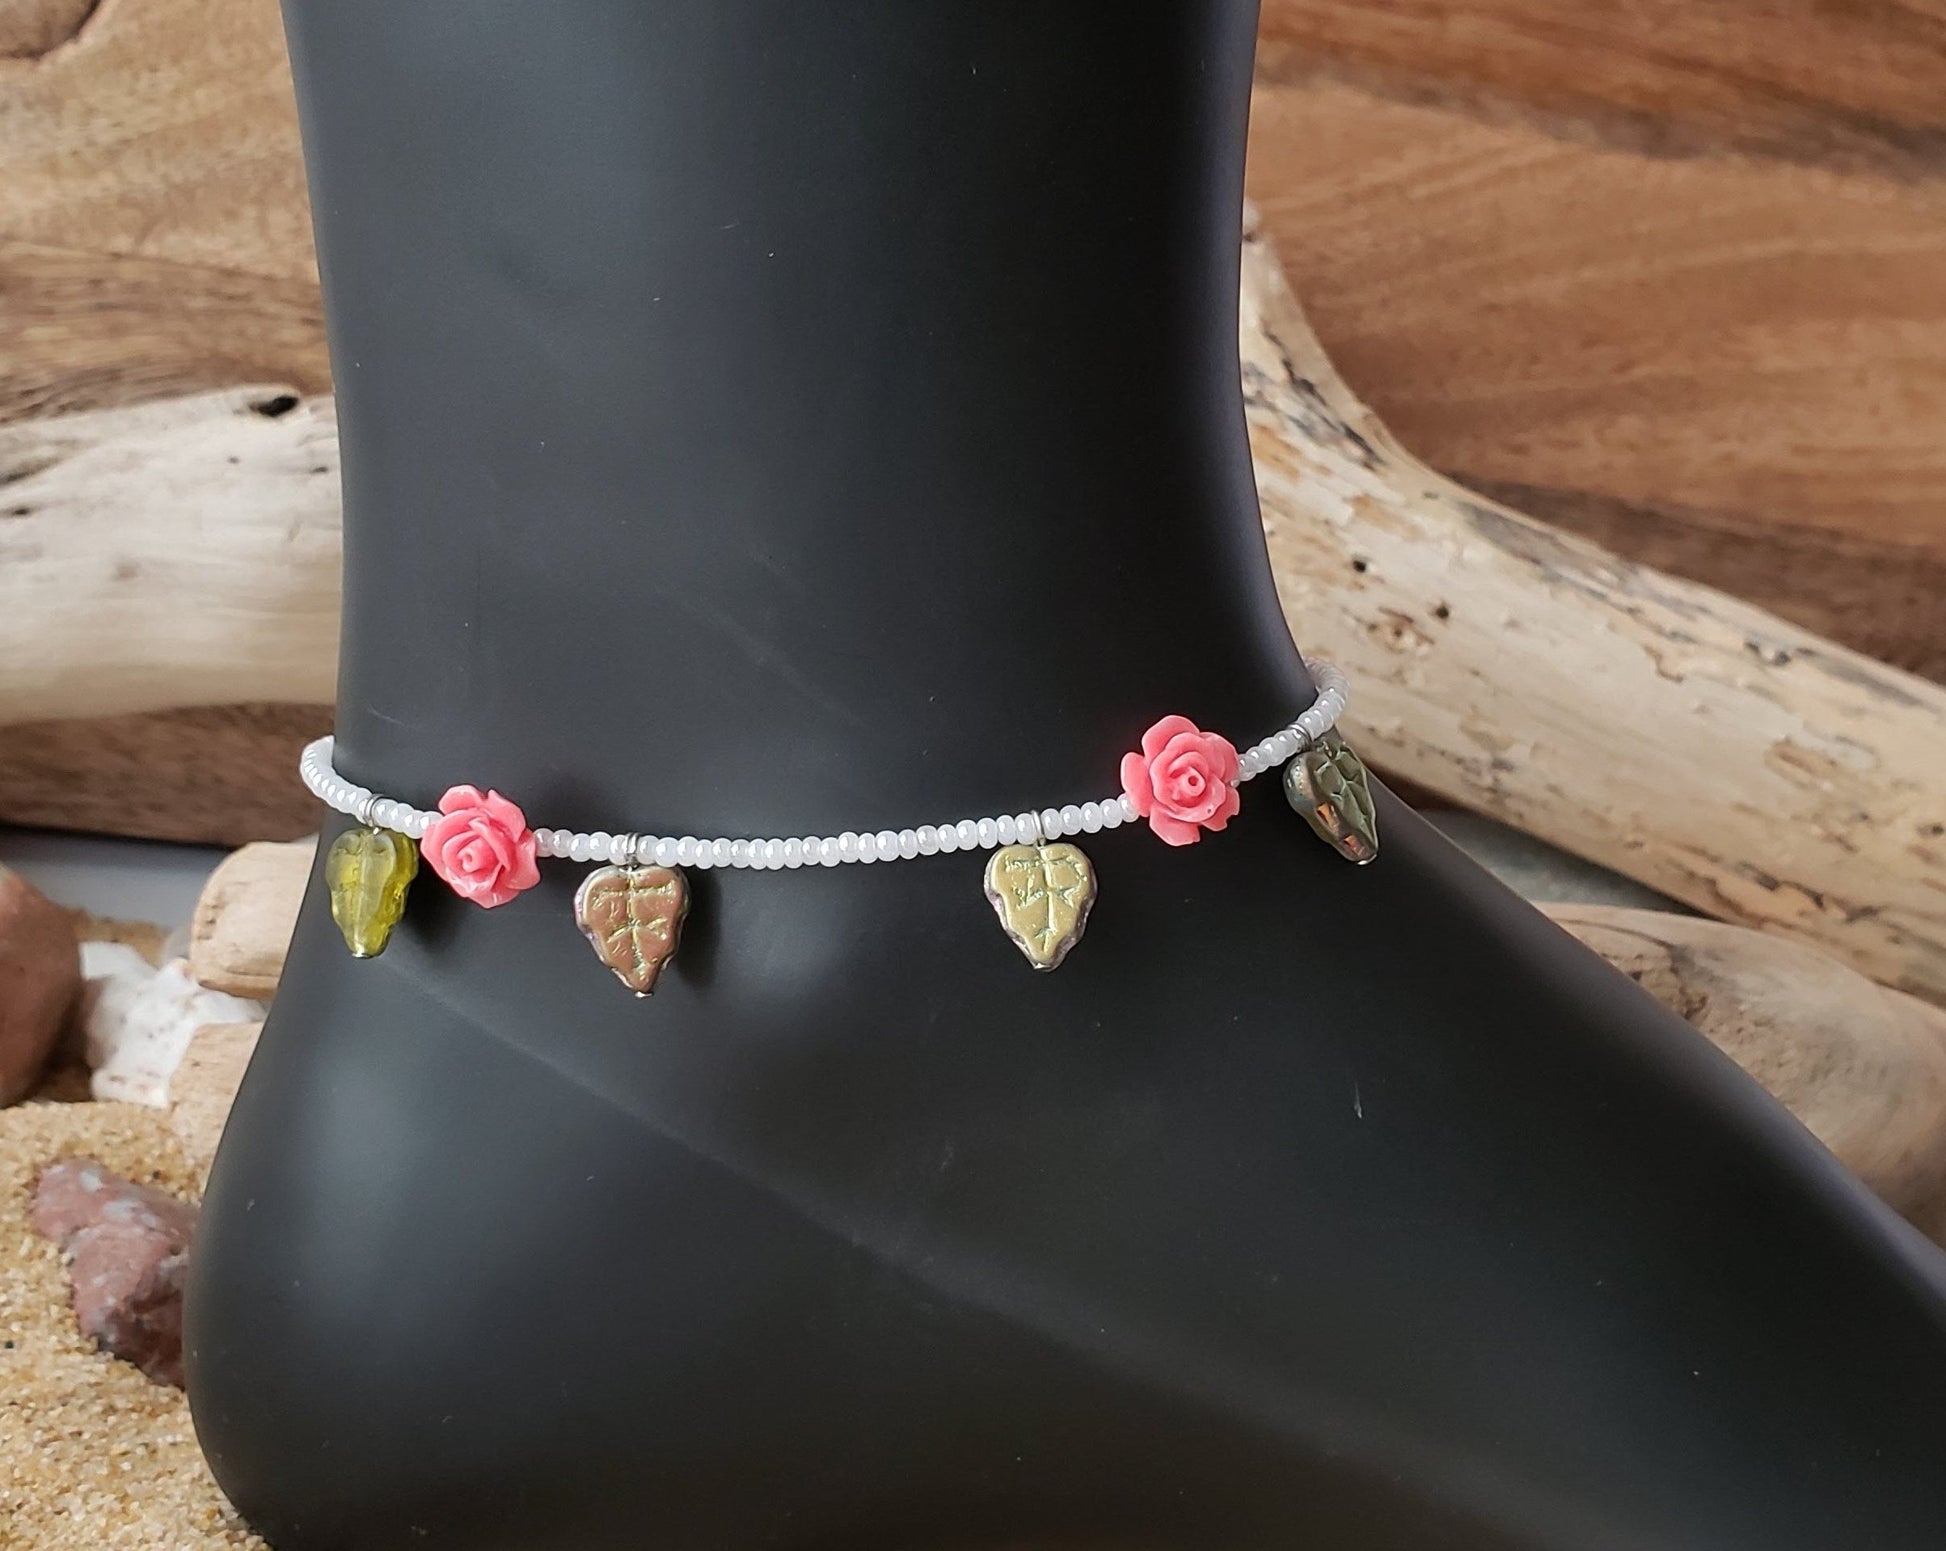 Rose Garden Anklet, Ankle Bracelet, Beaded Anklet with Pink Flowers, Green Leafs, pearlized white seed beads